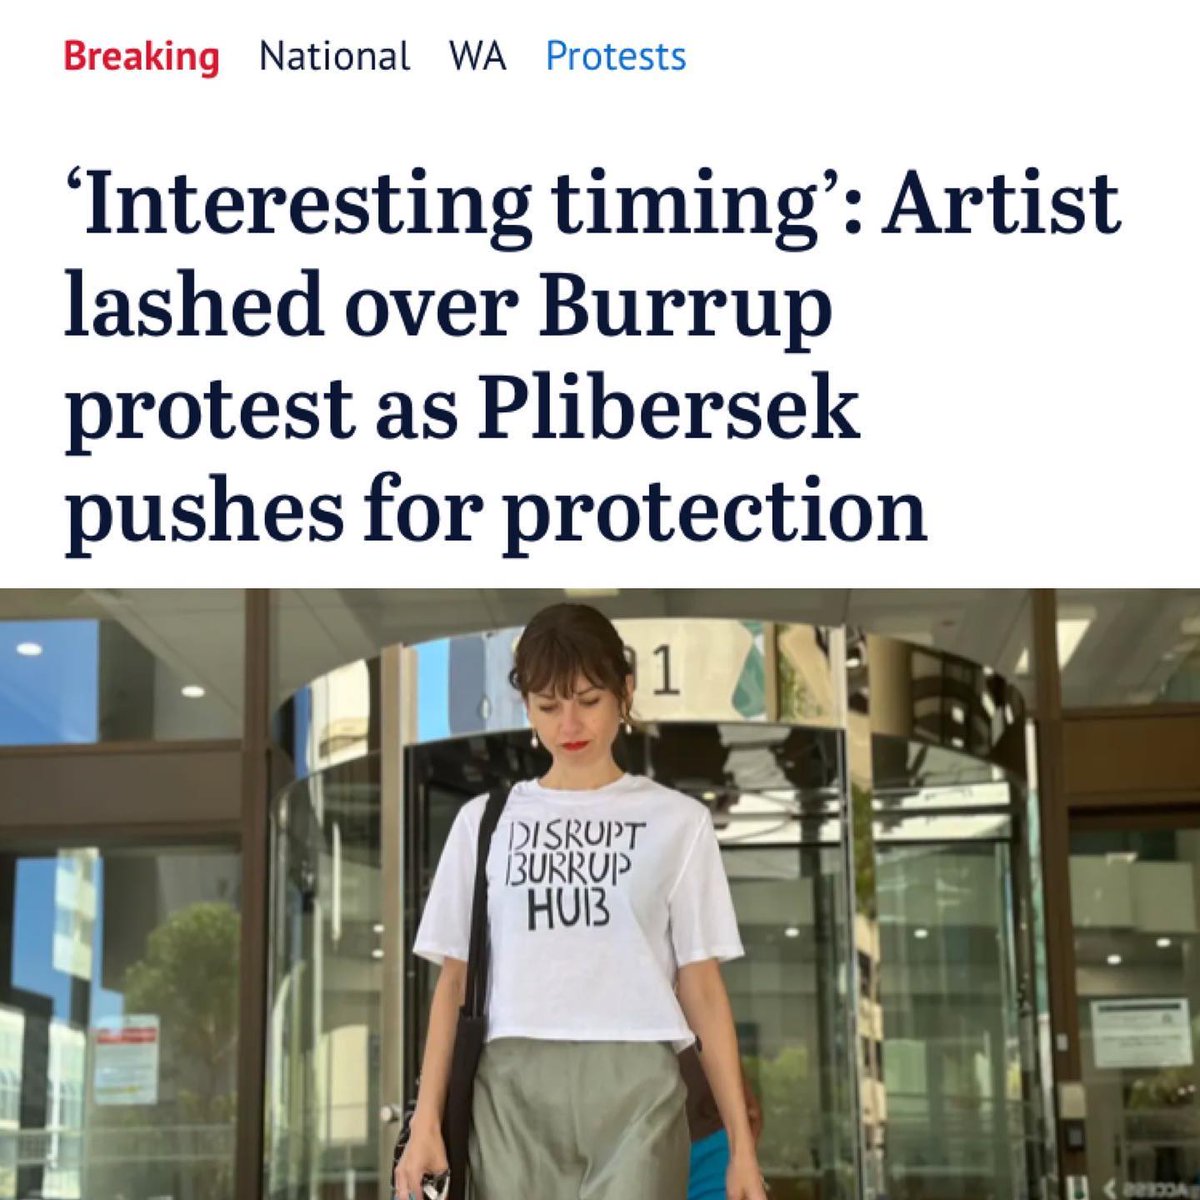 BREAKING ⚡️ Today Joana faced Perth Magistrates Court for her action at the Art Gallery of WA last month. Joana was convicted of criminal damage and handed down $7,500 in fines and costs for damage.